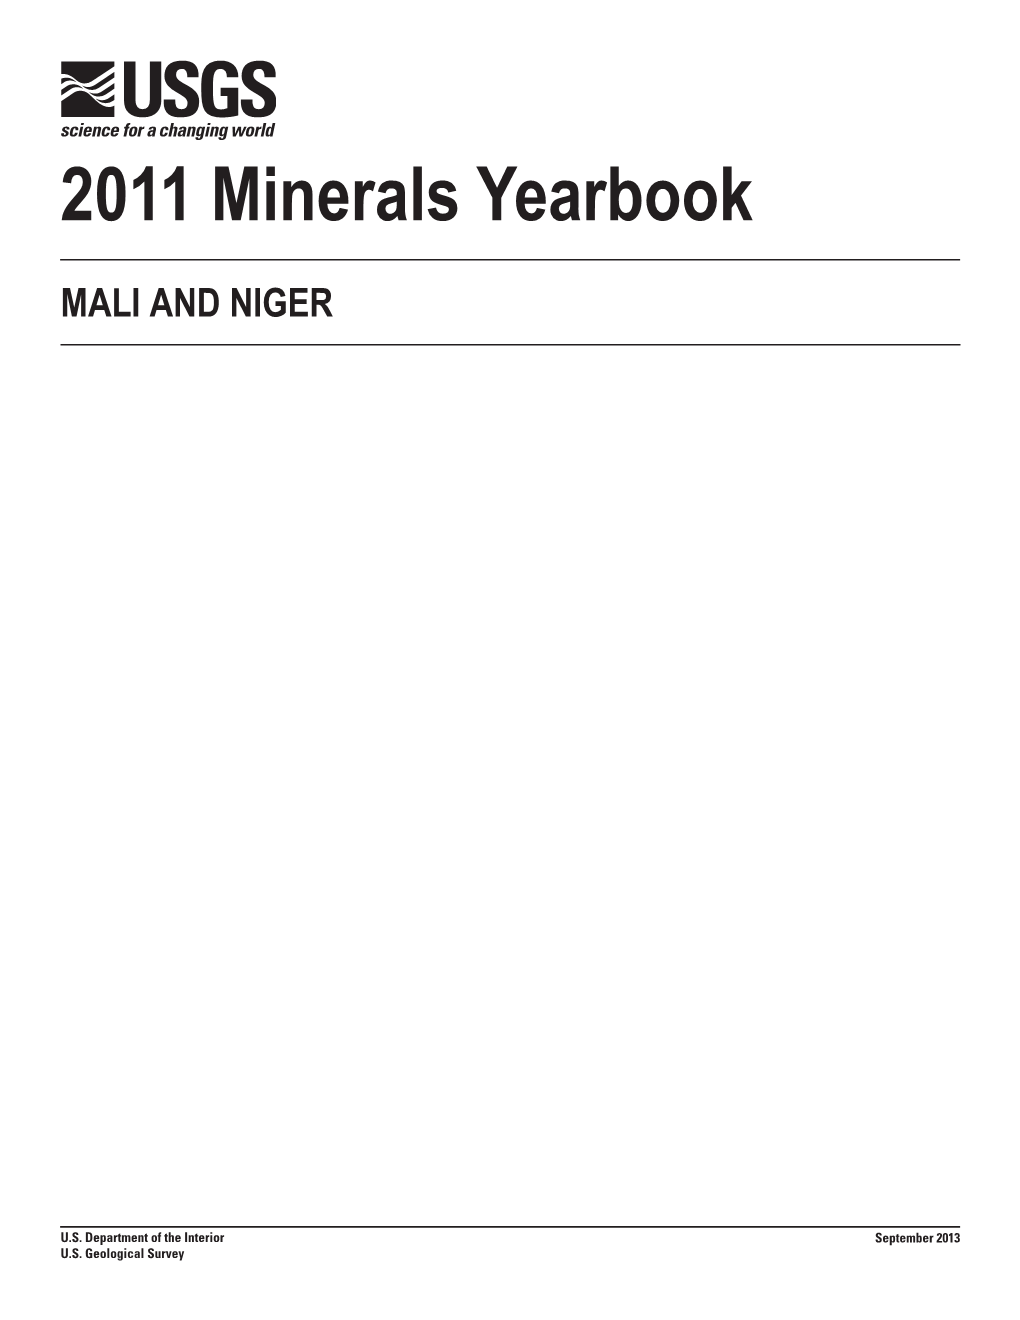 The Mineral Industries of Mali and Niger in 2011